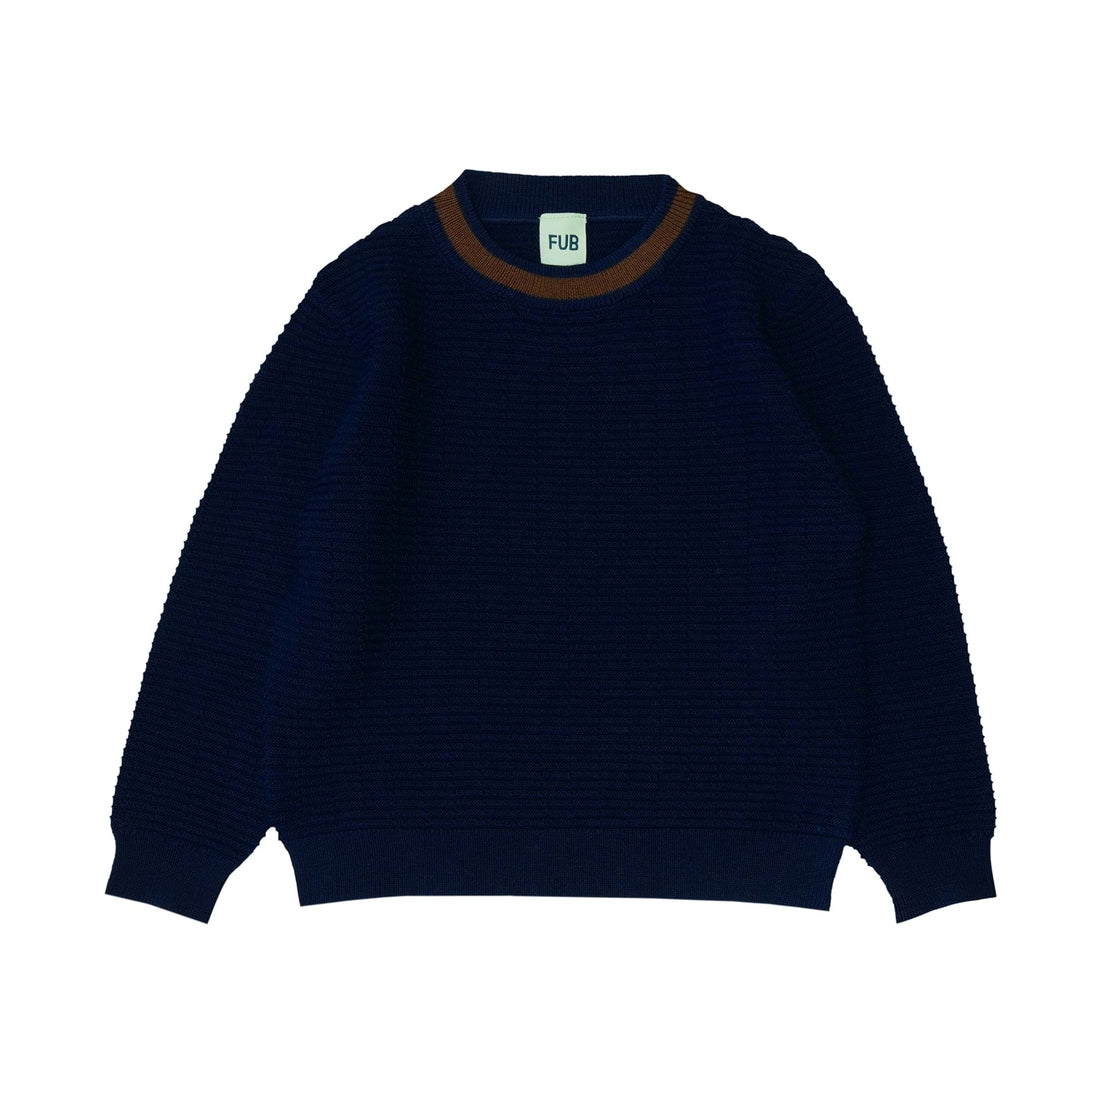 Fub Royal Blue Structure Sweater